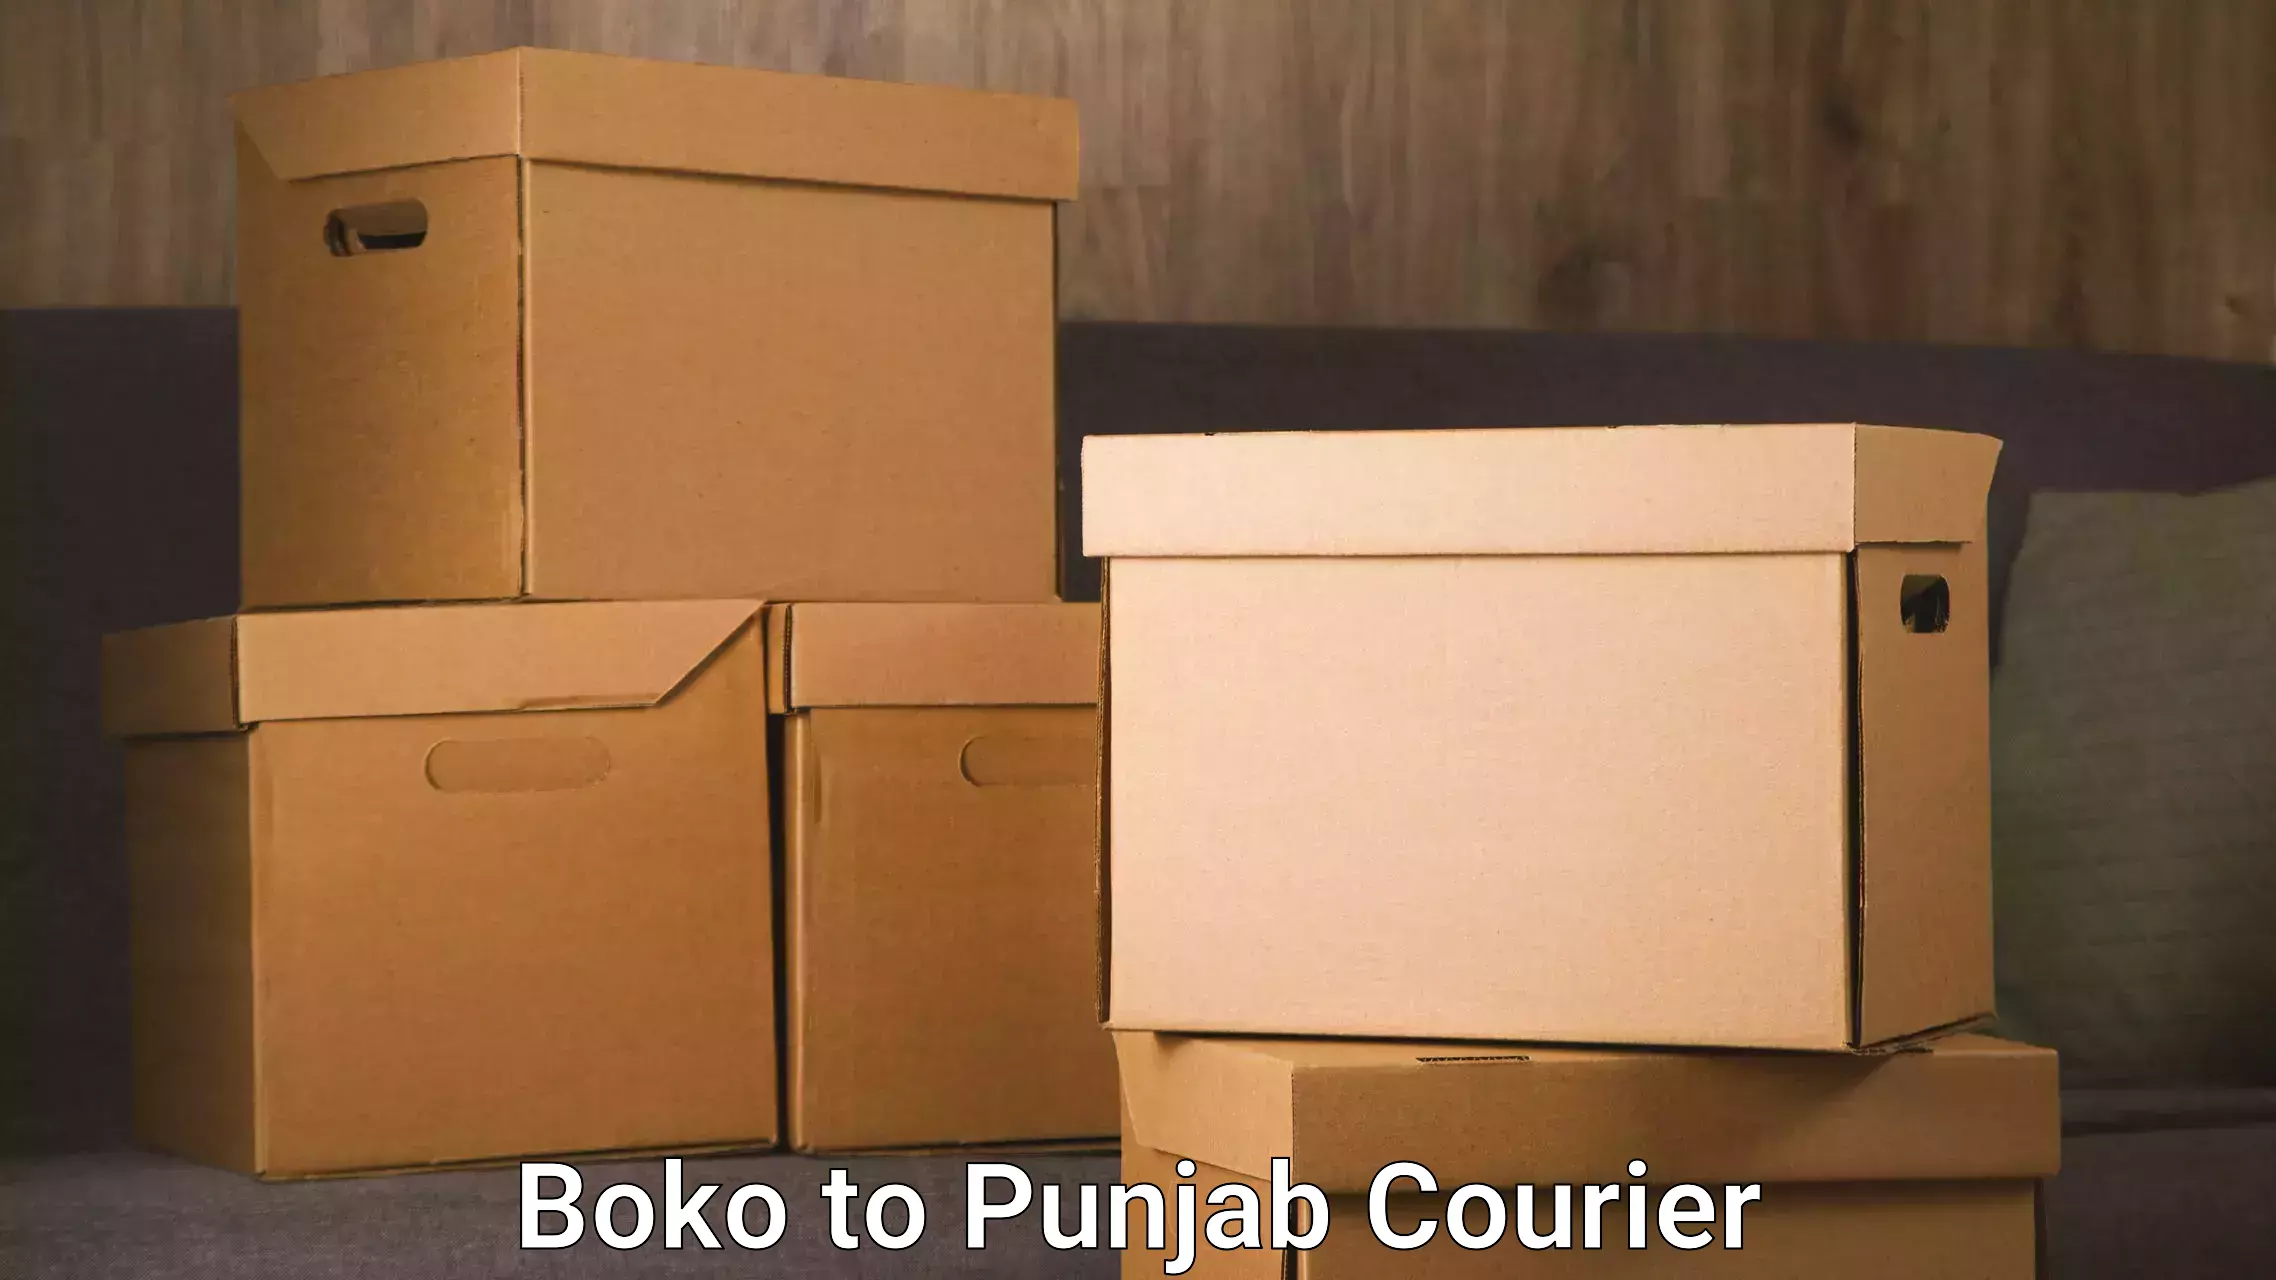 Rapid freight solutions Boko to Punjab